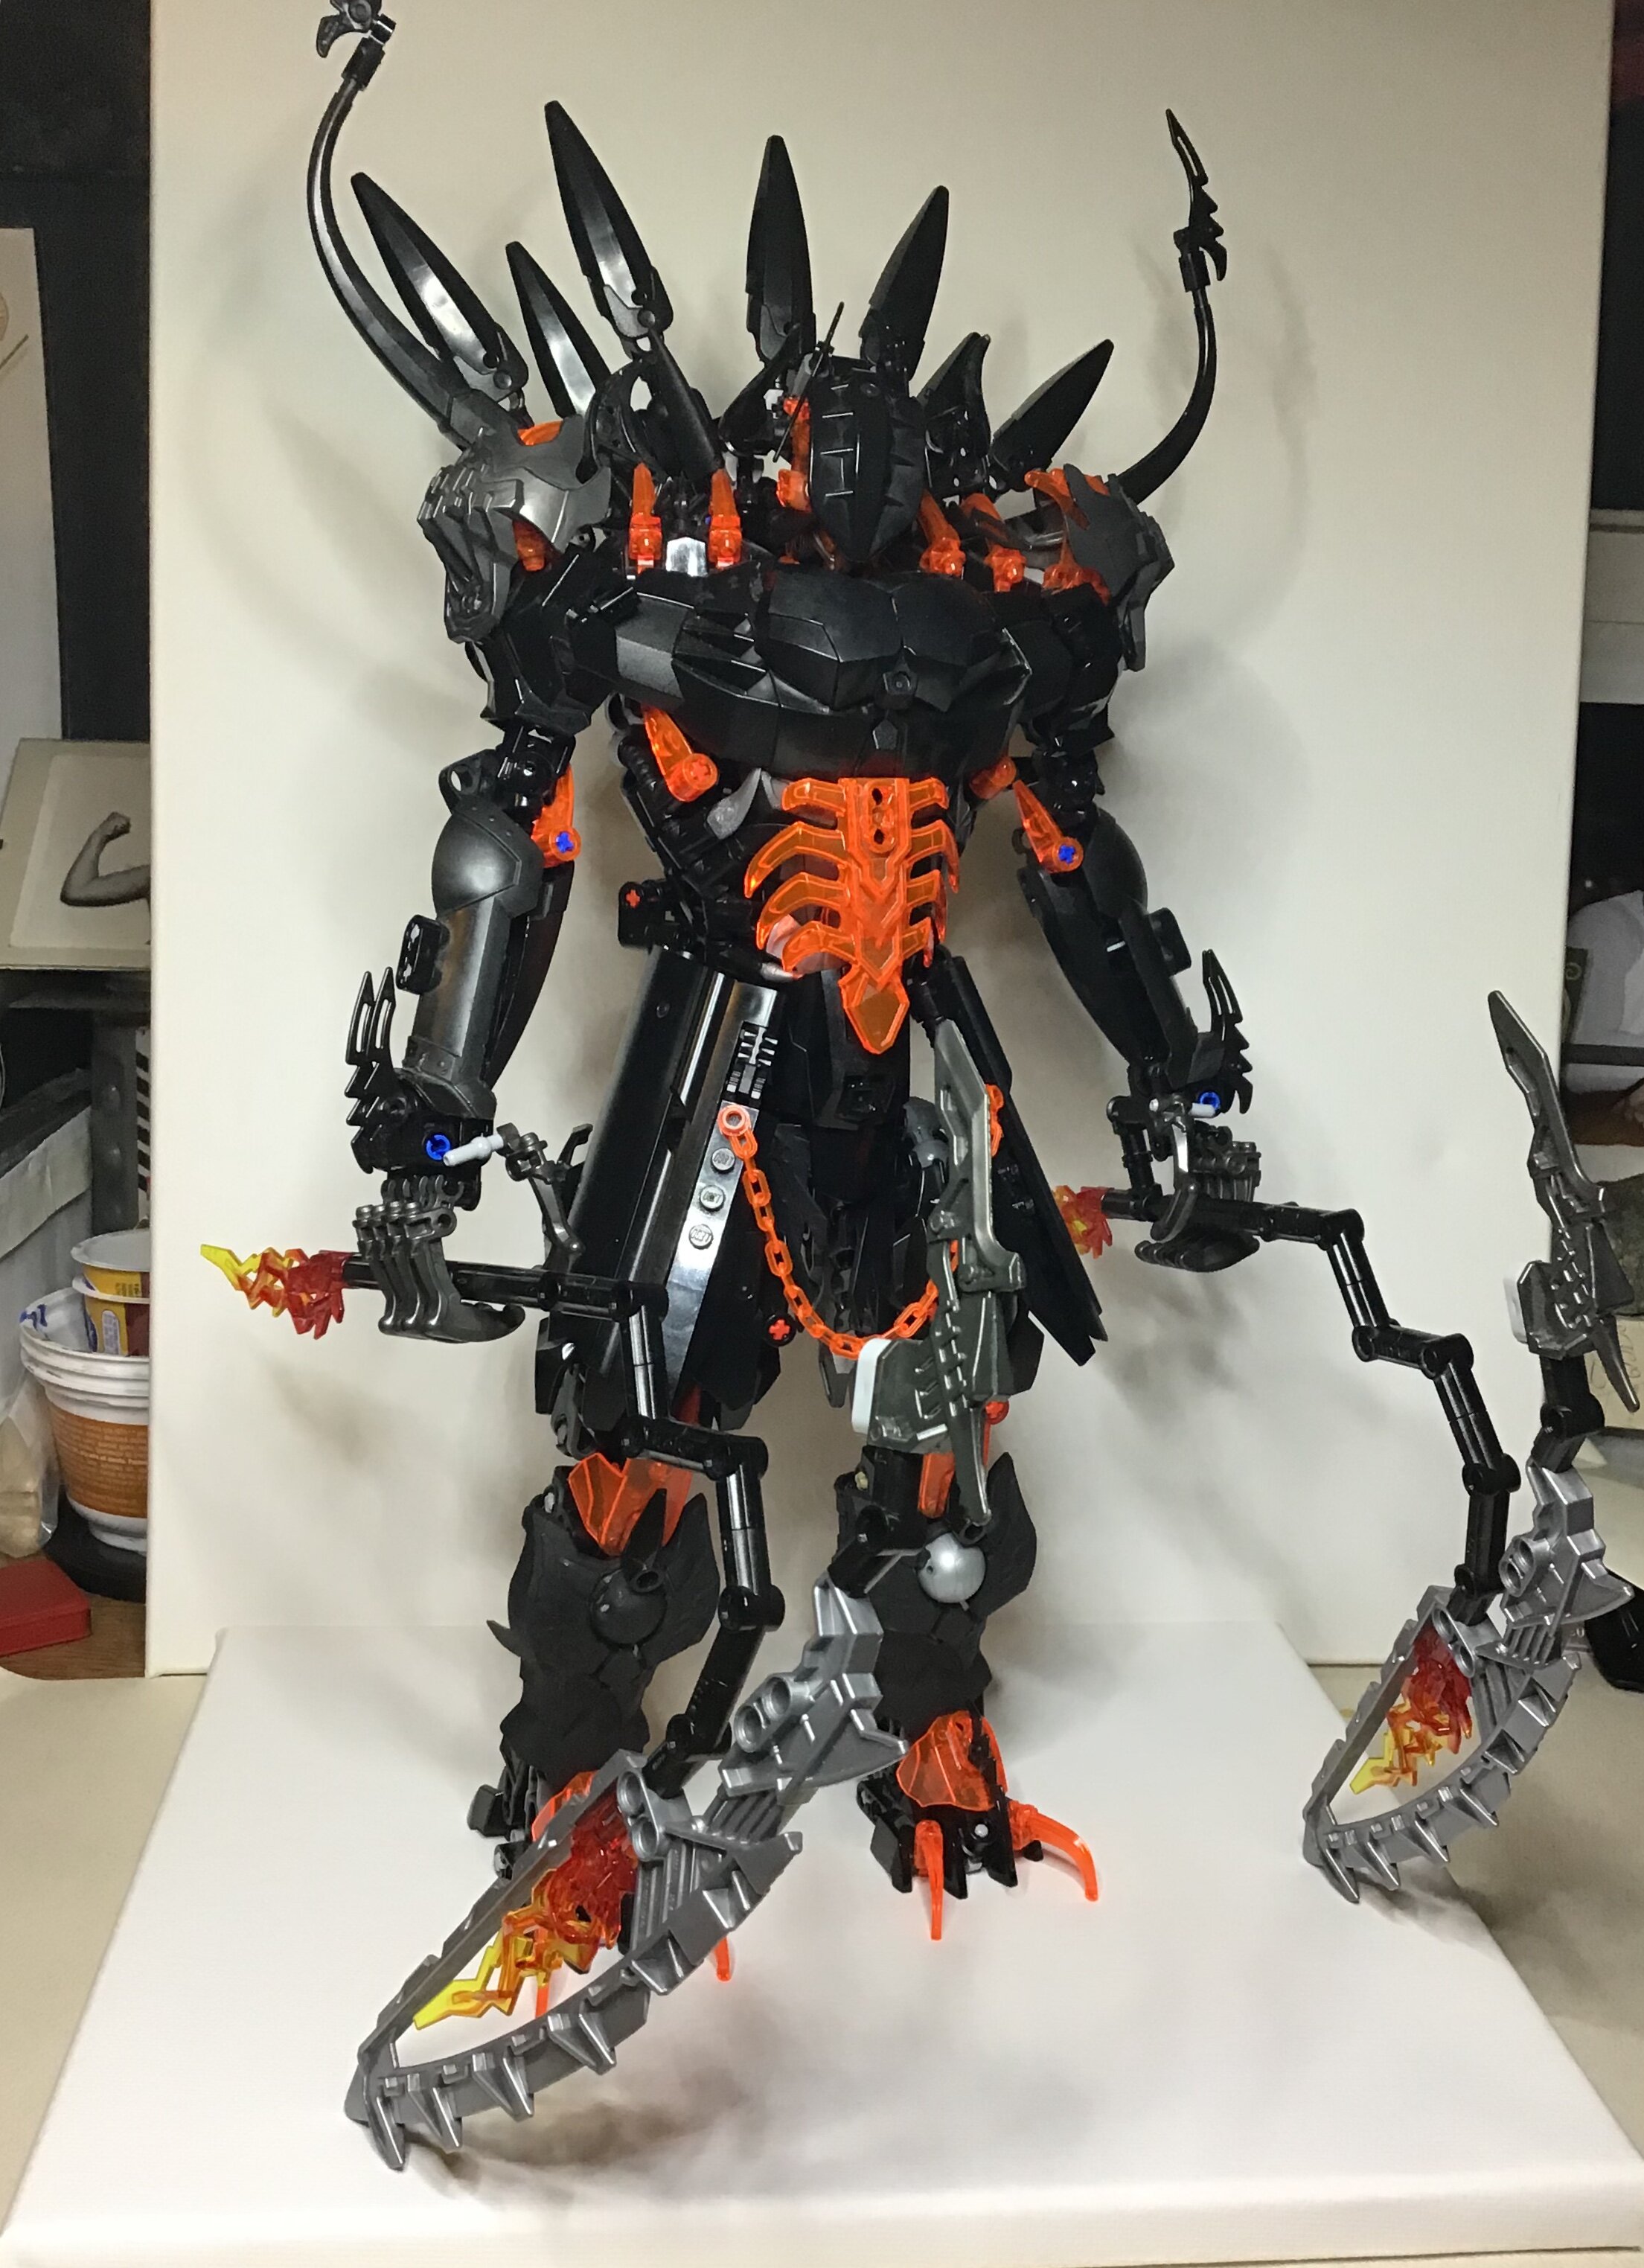 Bionicle moc - Azrael - Lego Creations - The TTV Message Boards